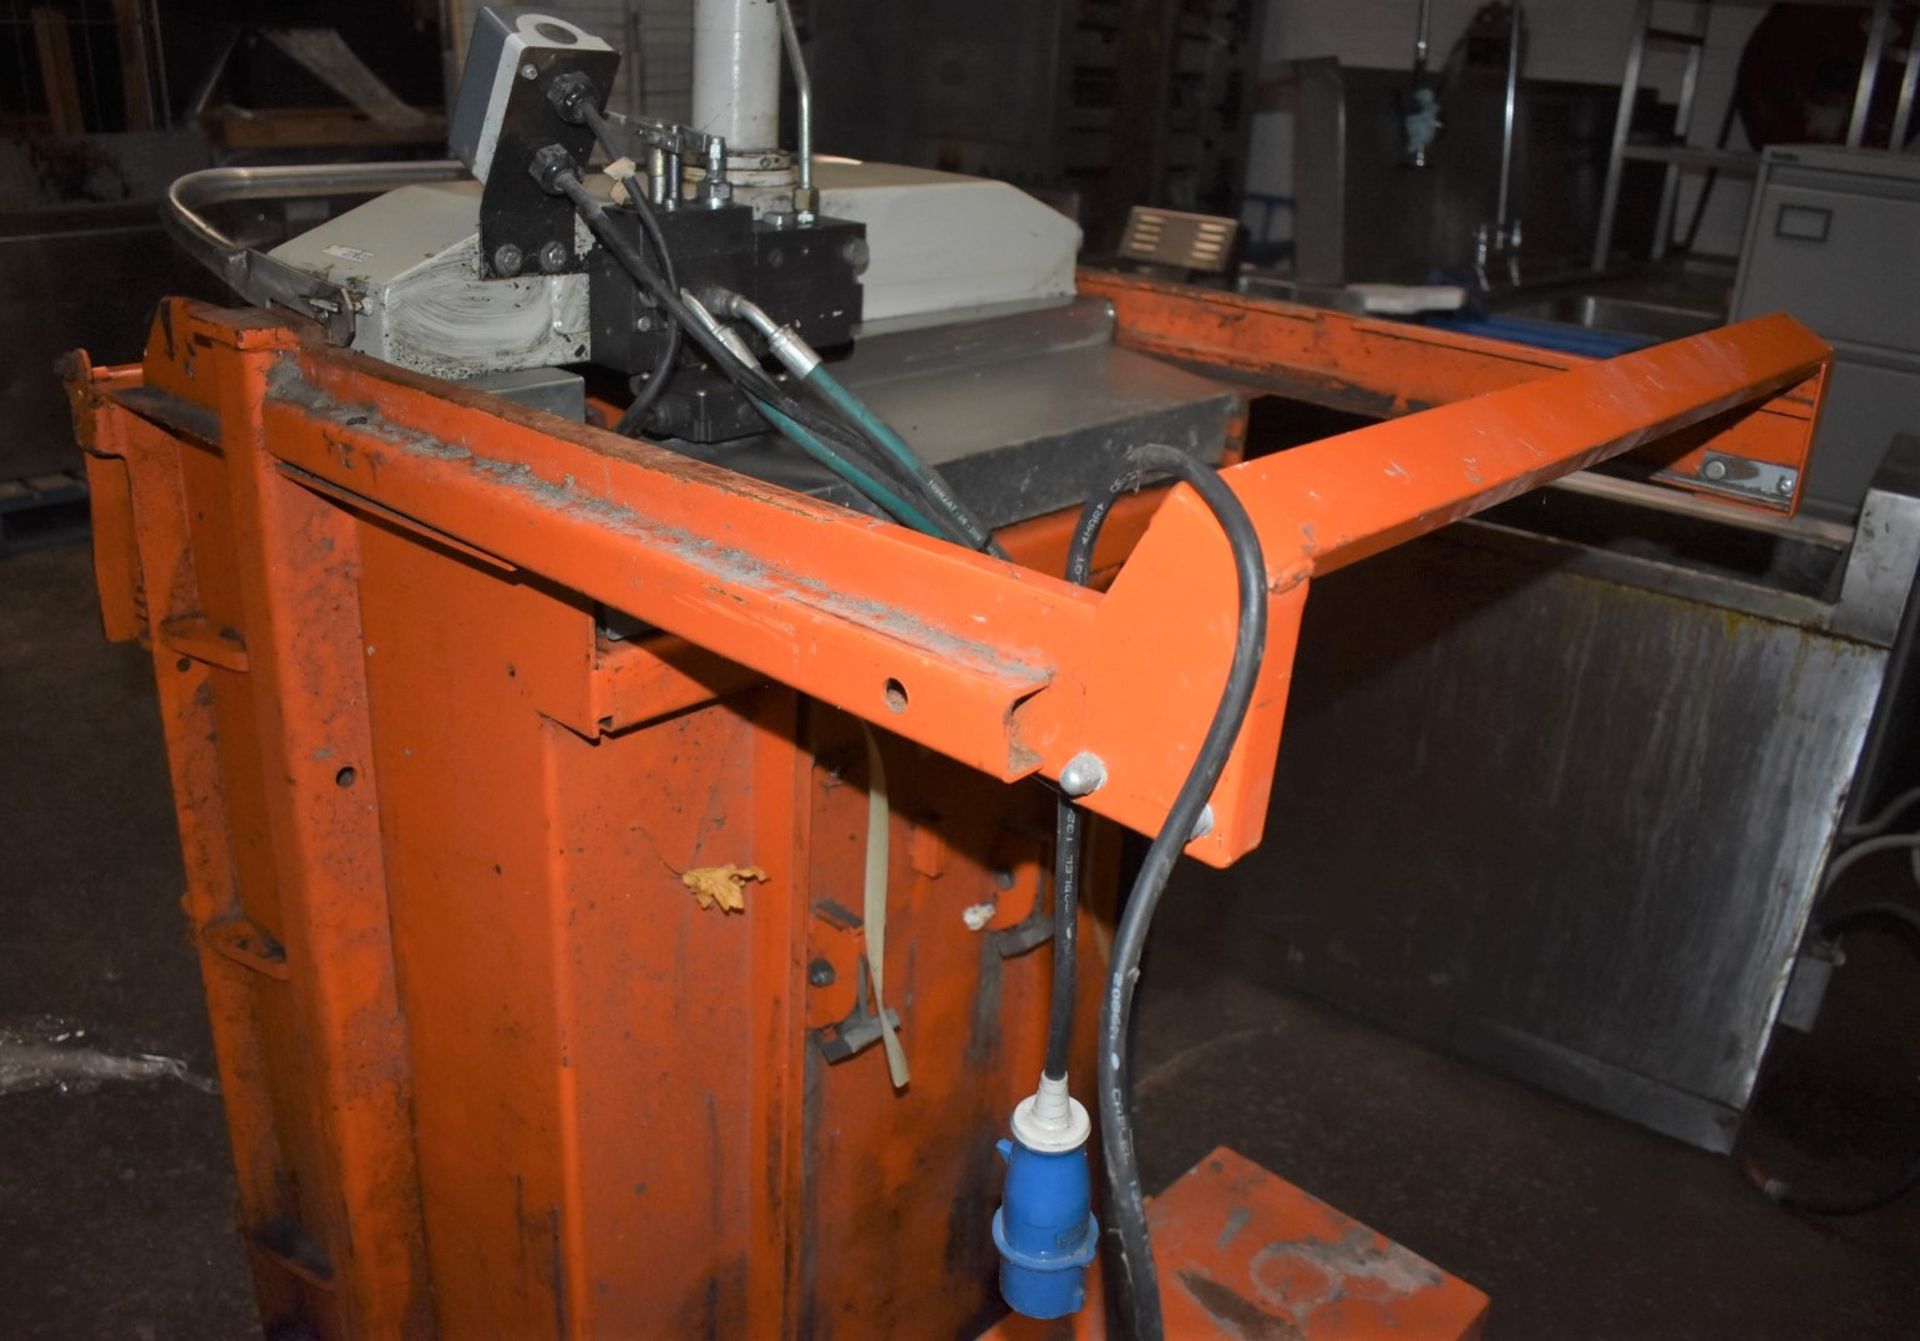 1 x Orwak 5010 Hydraulic Press Compact Cardboard Baler - Used For Compacting Recyclable or Non- - Image 11 of 15